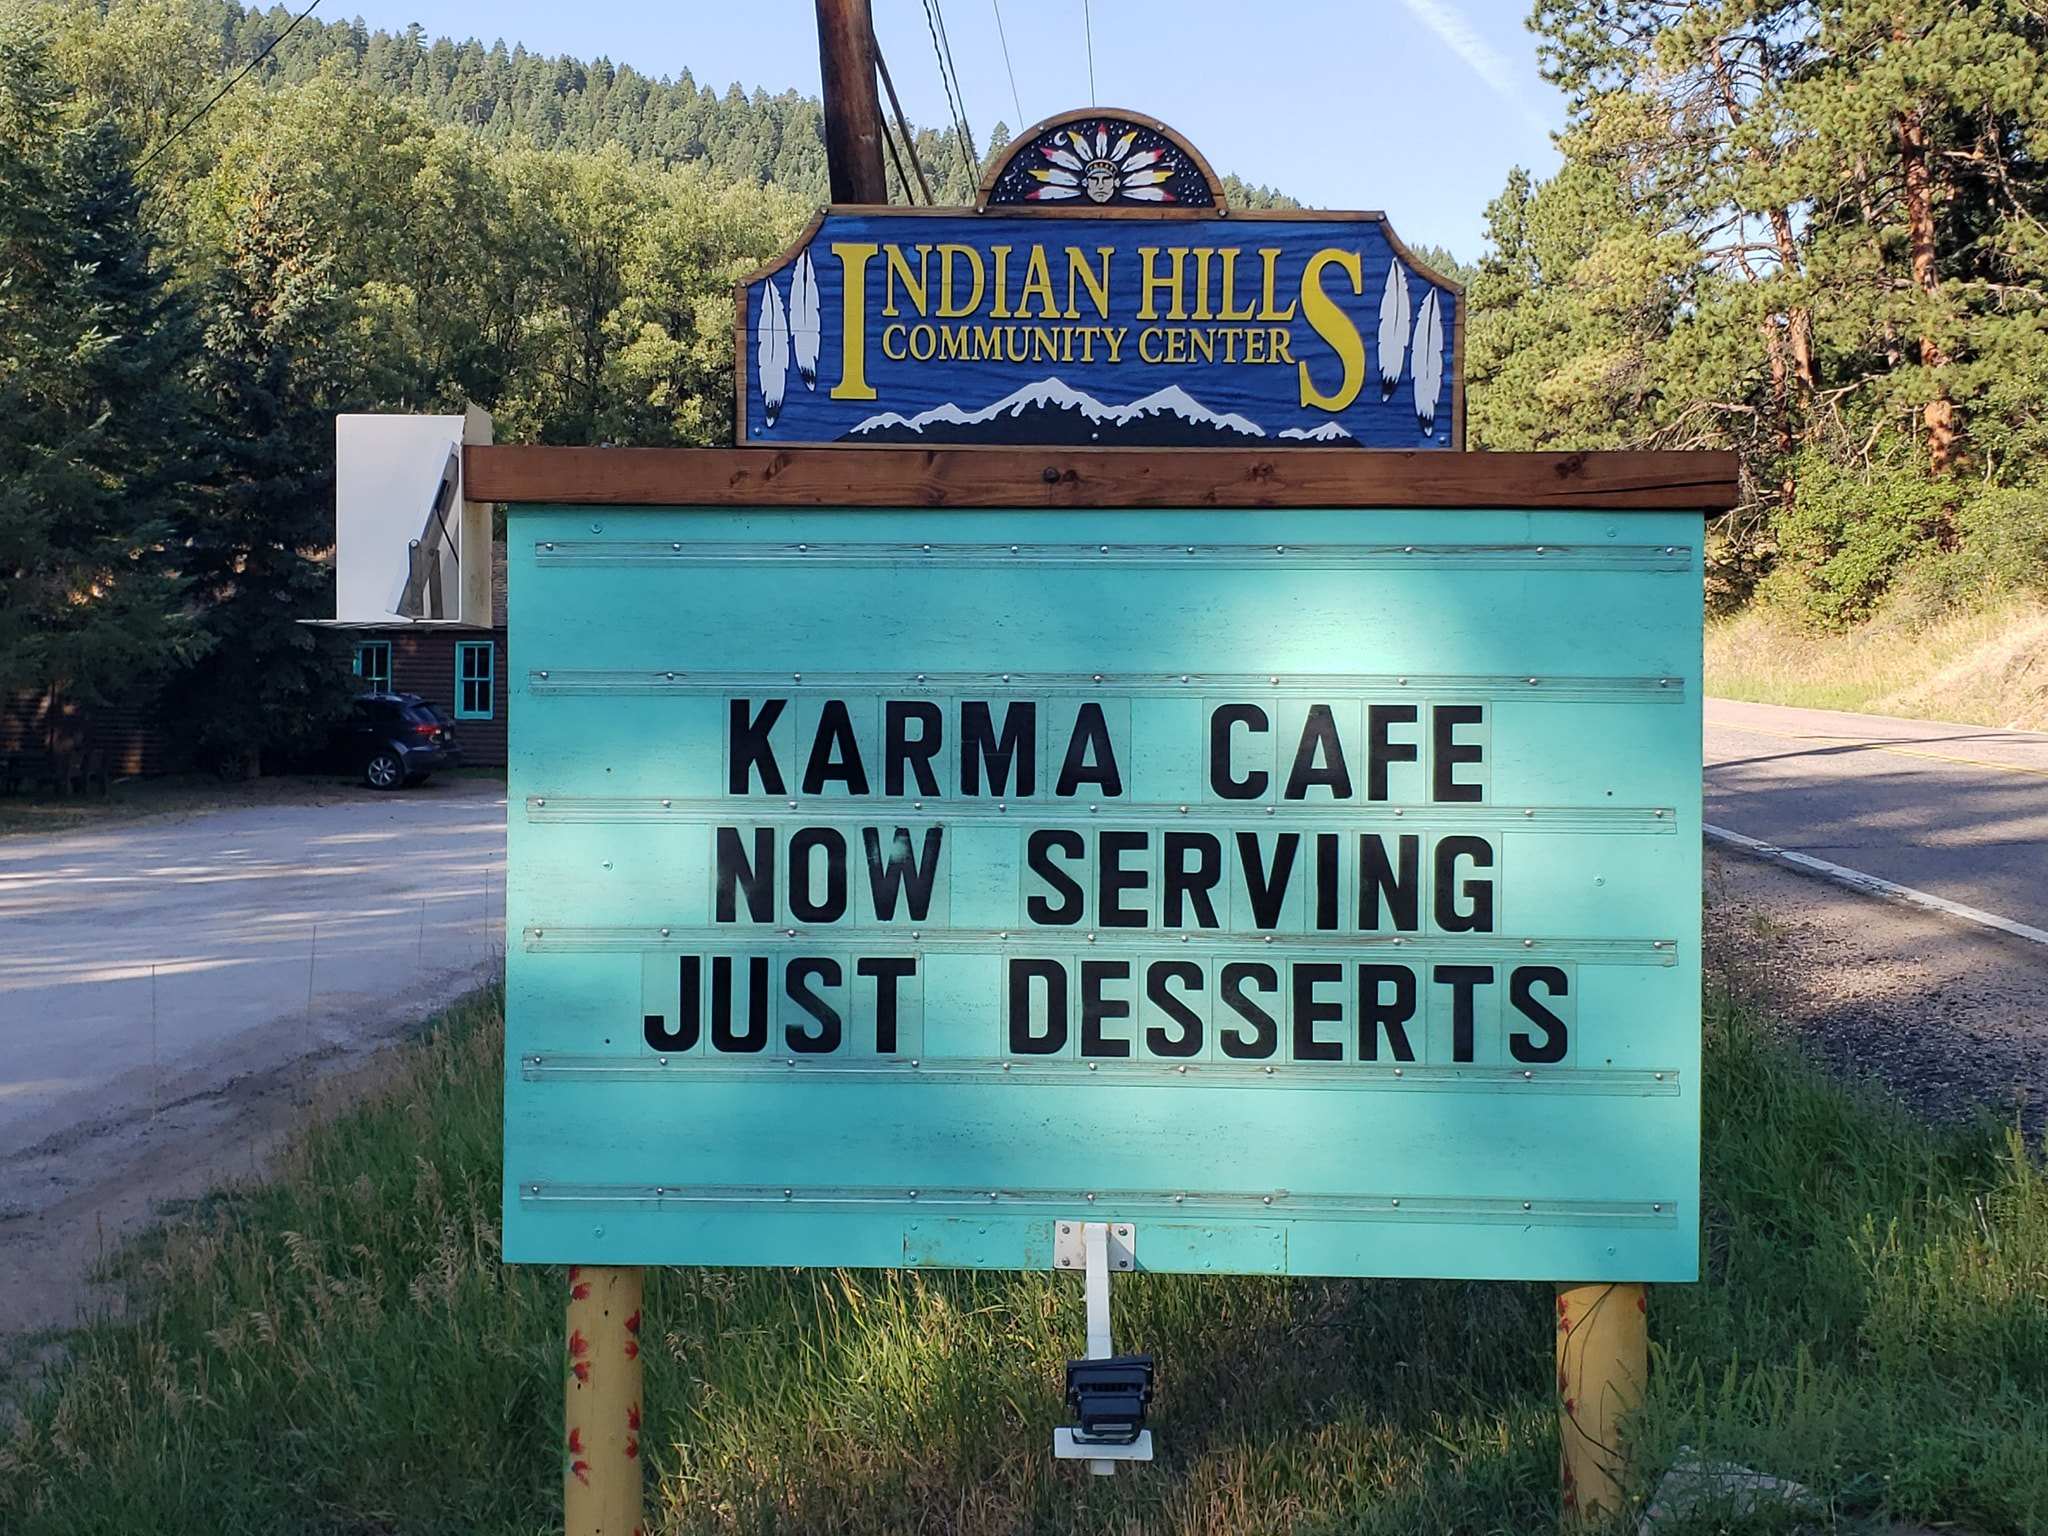 community sign that says "Karma cafe now serving just desserts"